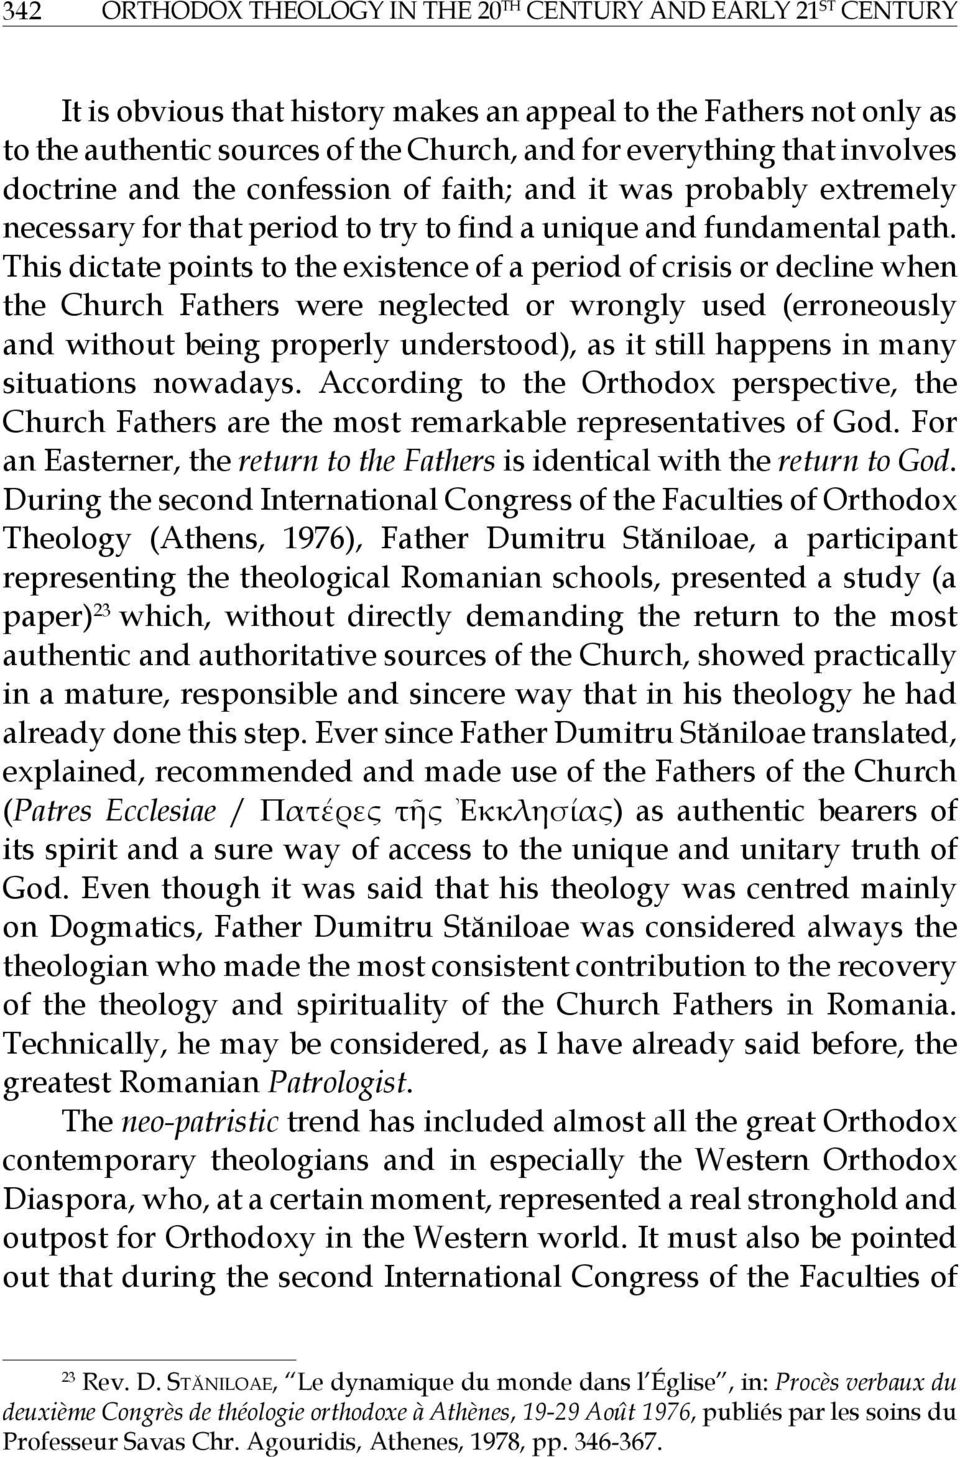 This dictate points to the existence of a period of crisis or decline when the Church Fathers were neglected or wrongly used (erroneously and without being properly understood), as it still happens